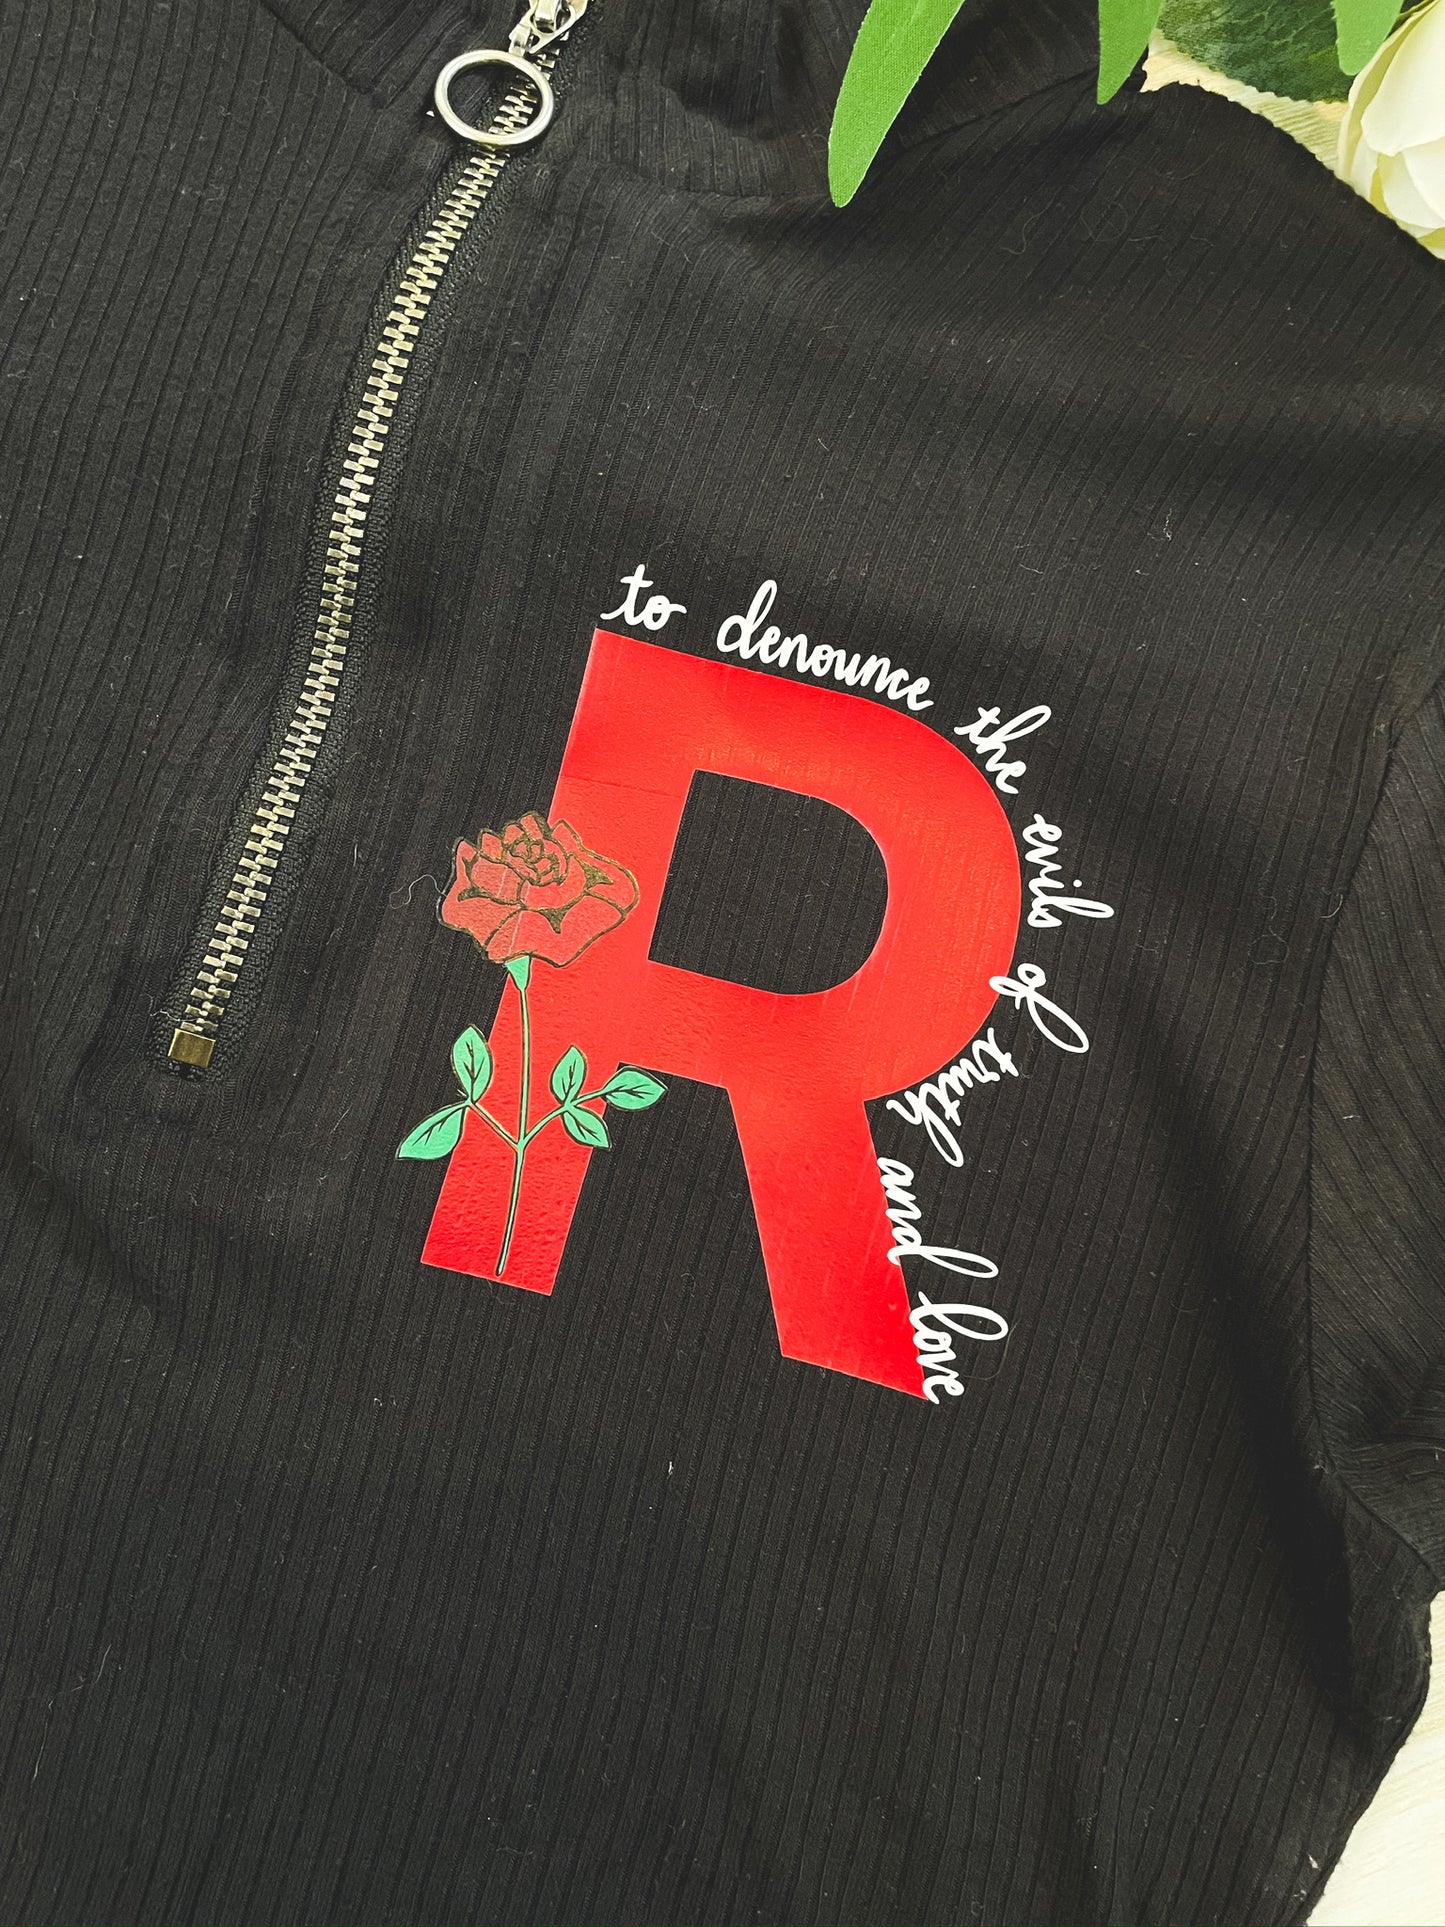 Thrifted - Juniors Small - "The Rockets"